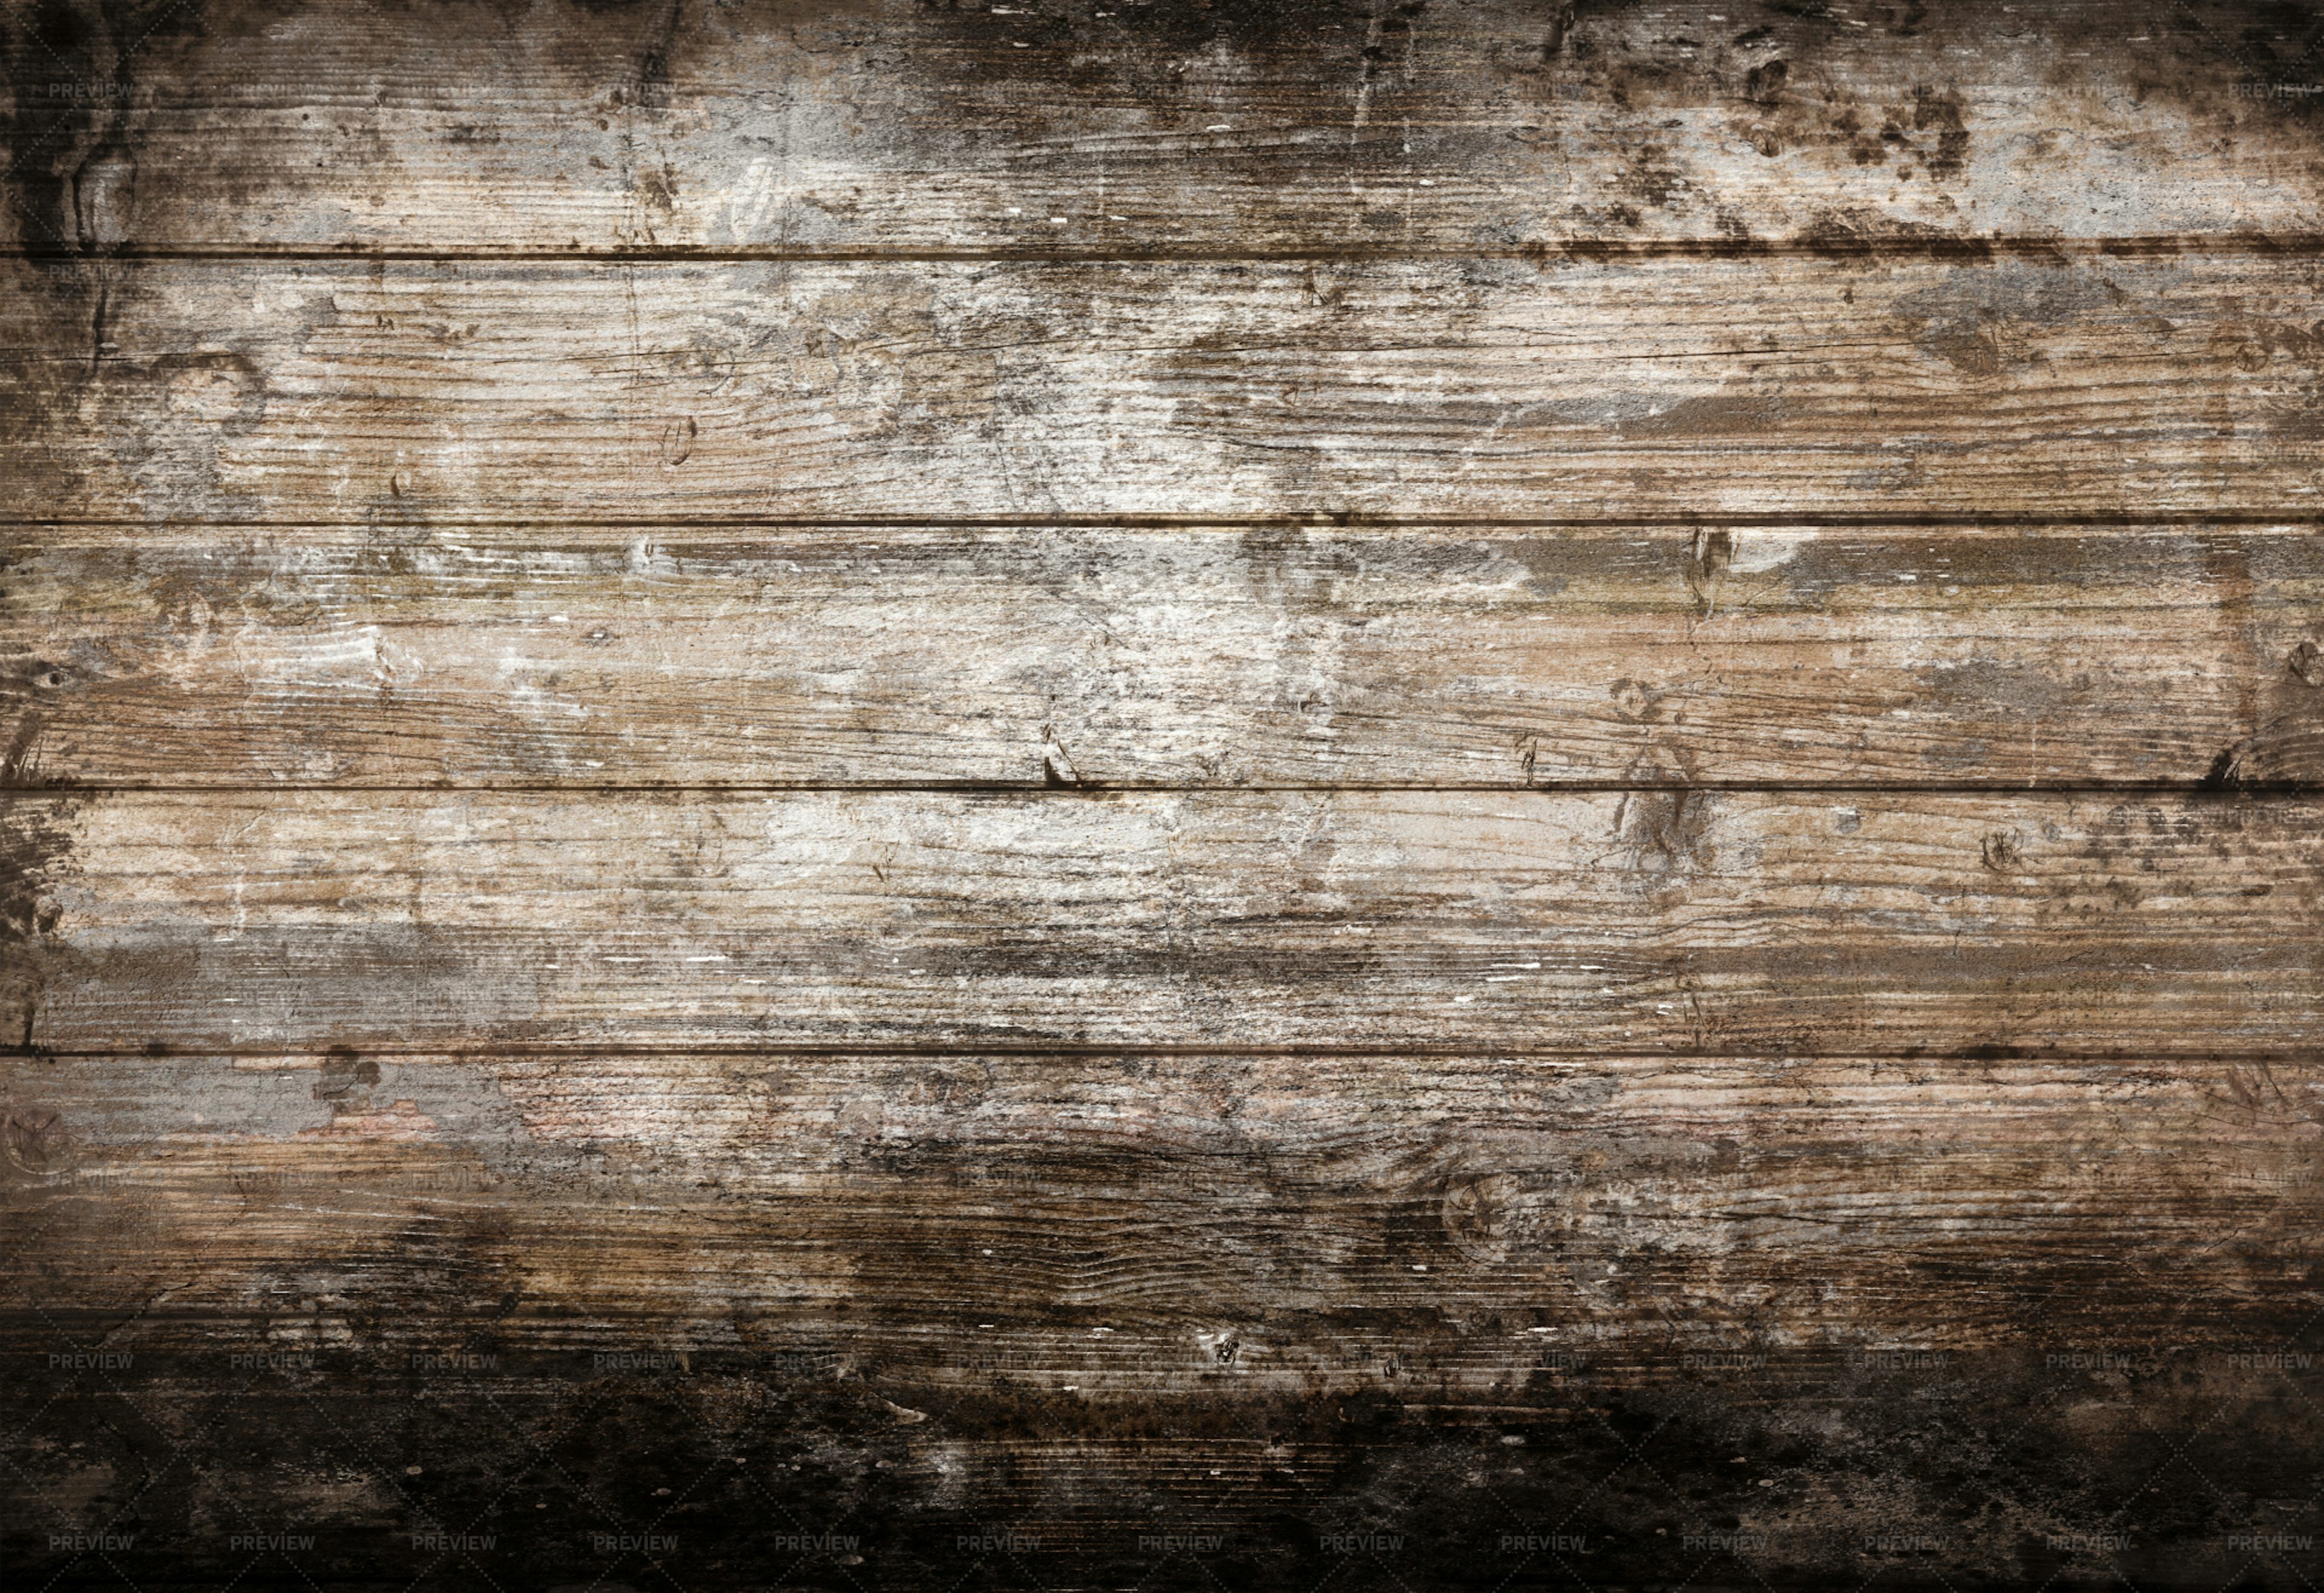 Wooden Background - Stock Photos | Motion Array